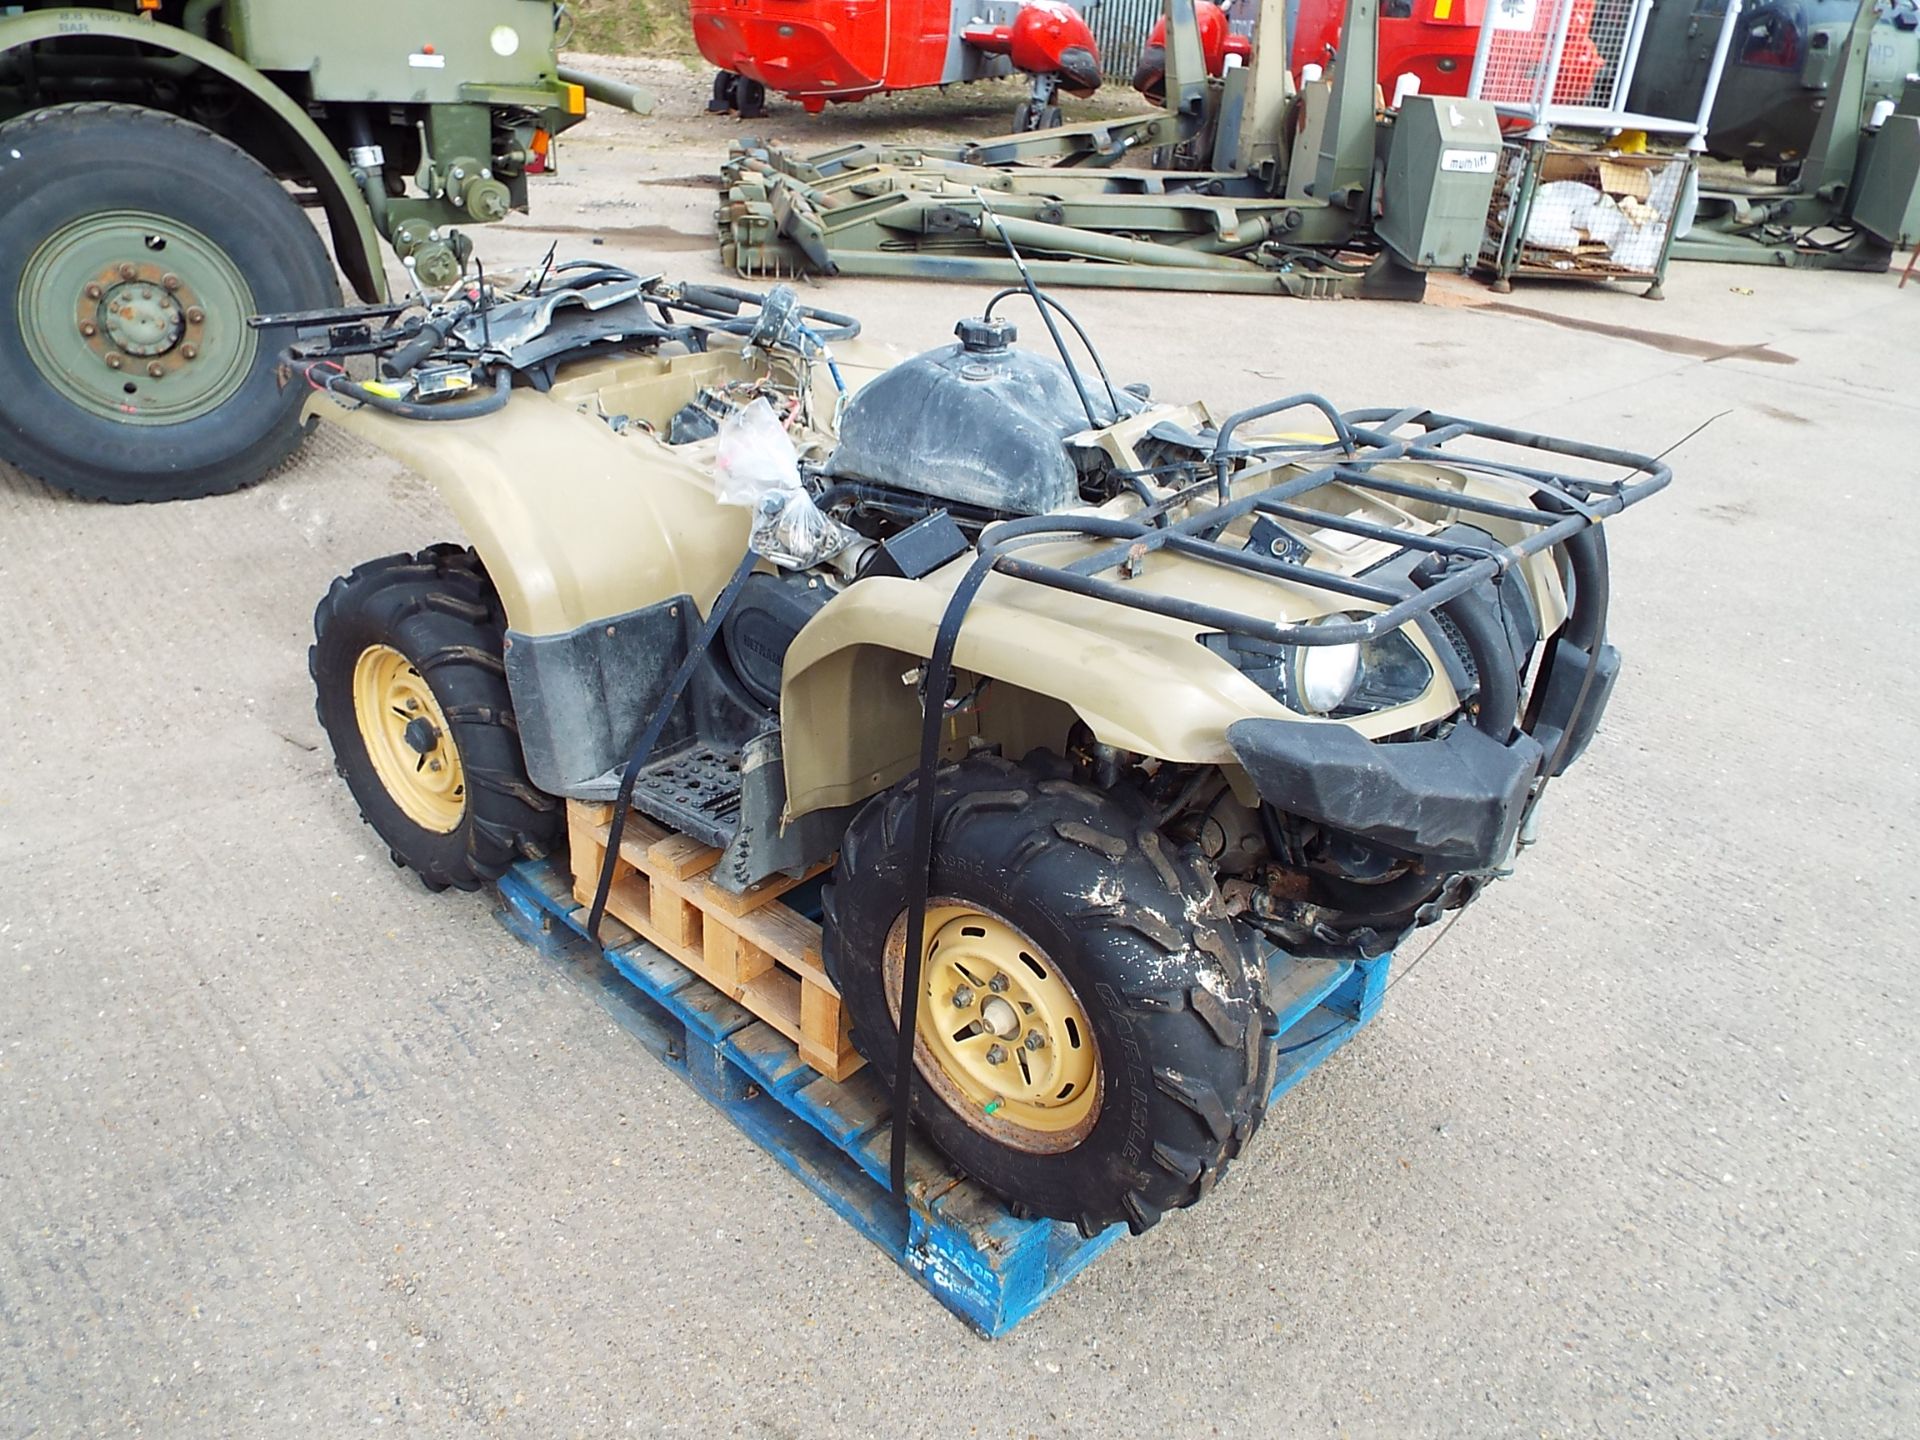 Military Specification Yamaha Grizzly 450 4 x 4 ATV Quad Bike with Winch